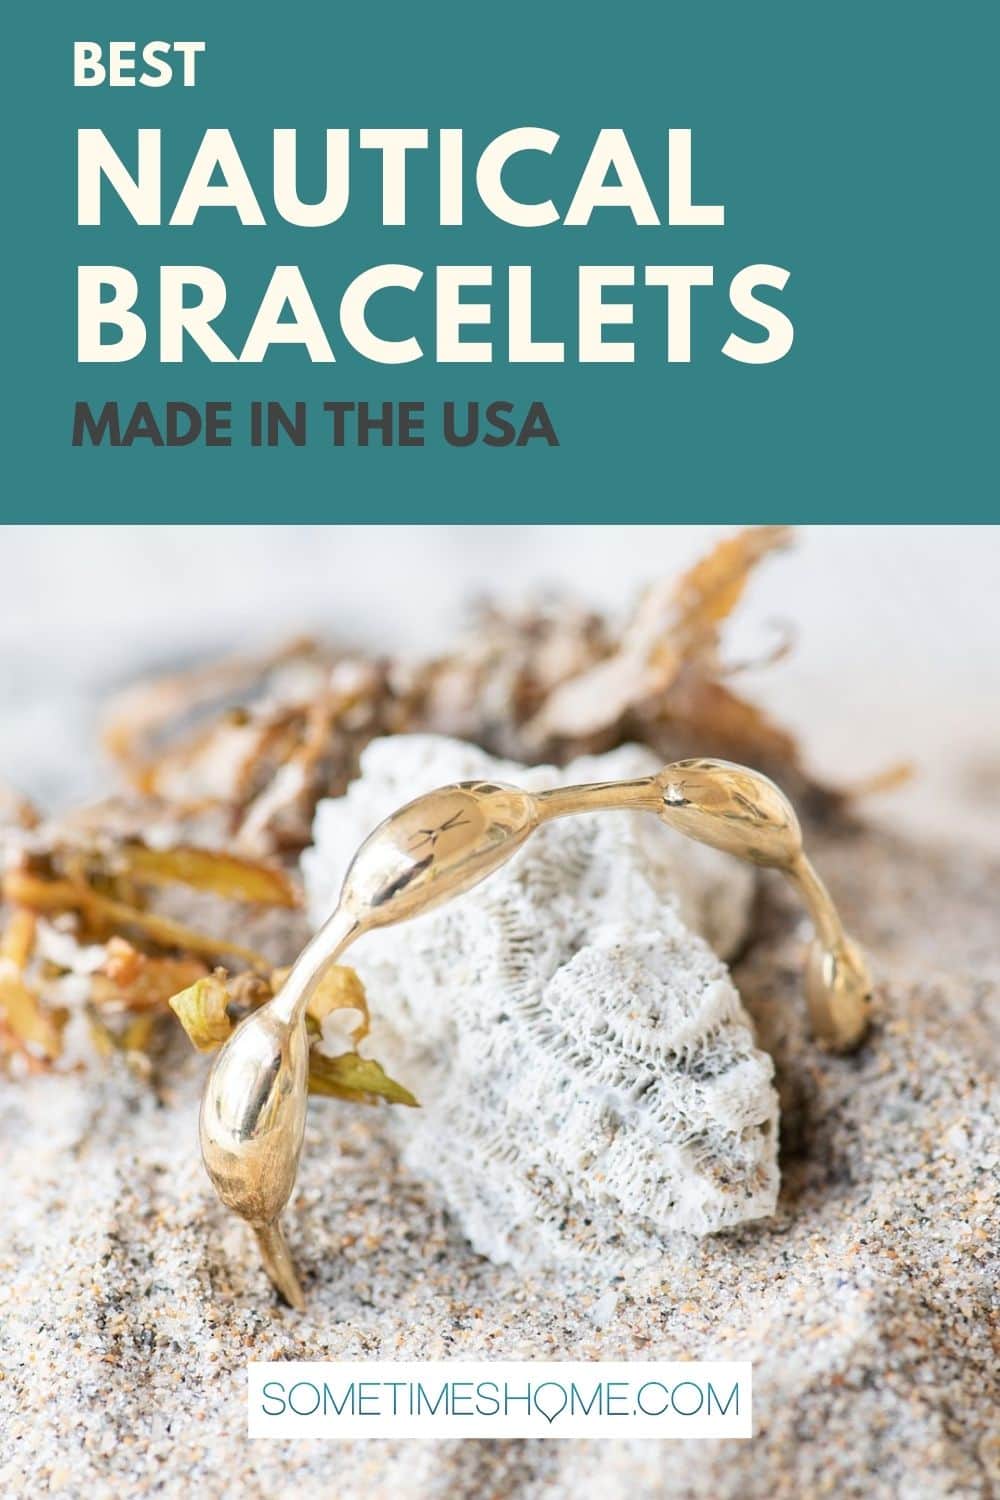 Pinterest image for the Best Nautical Bracelets made in the USA with a photo of a seaweed inspired bracelet.